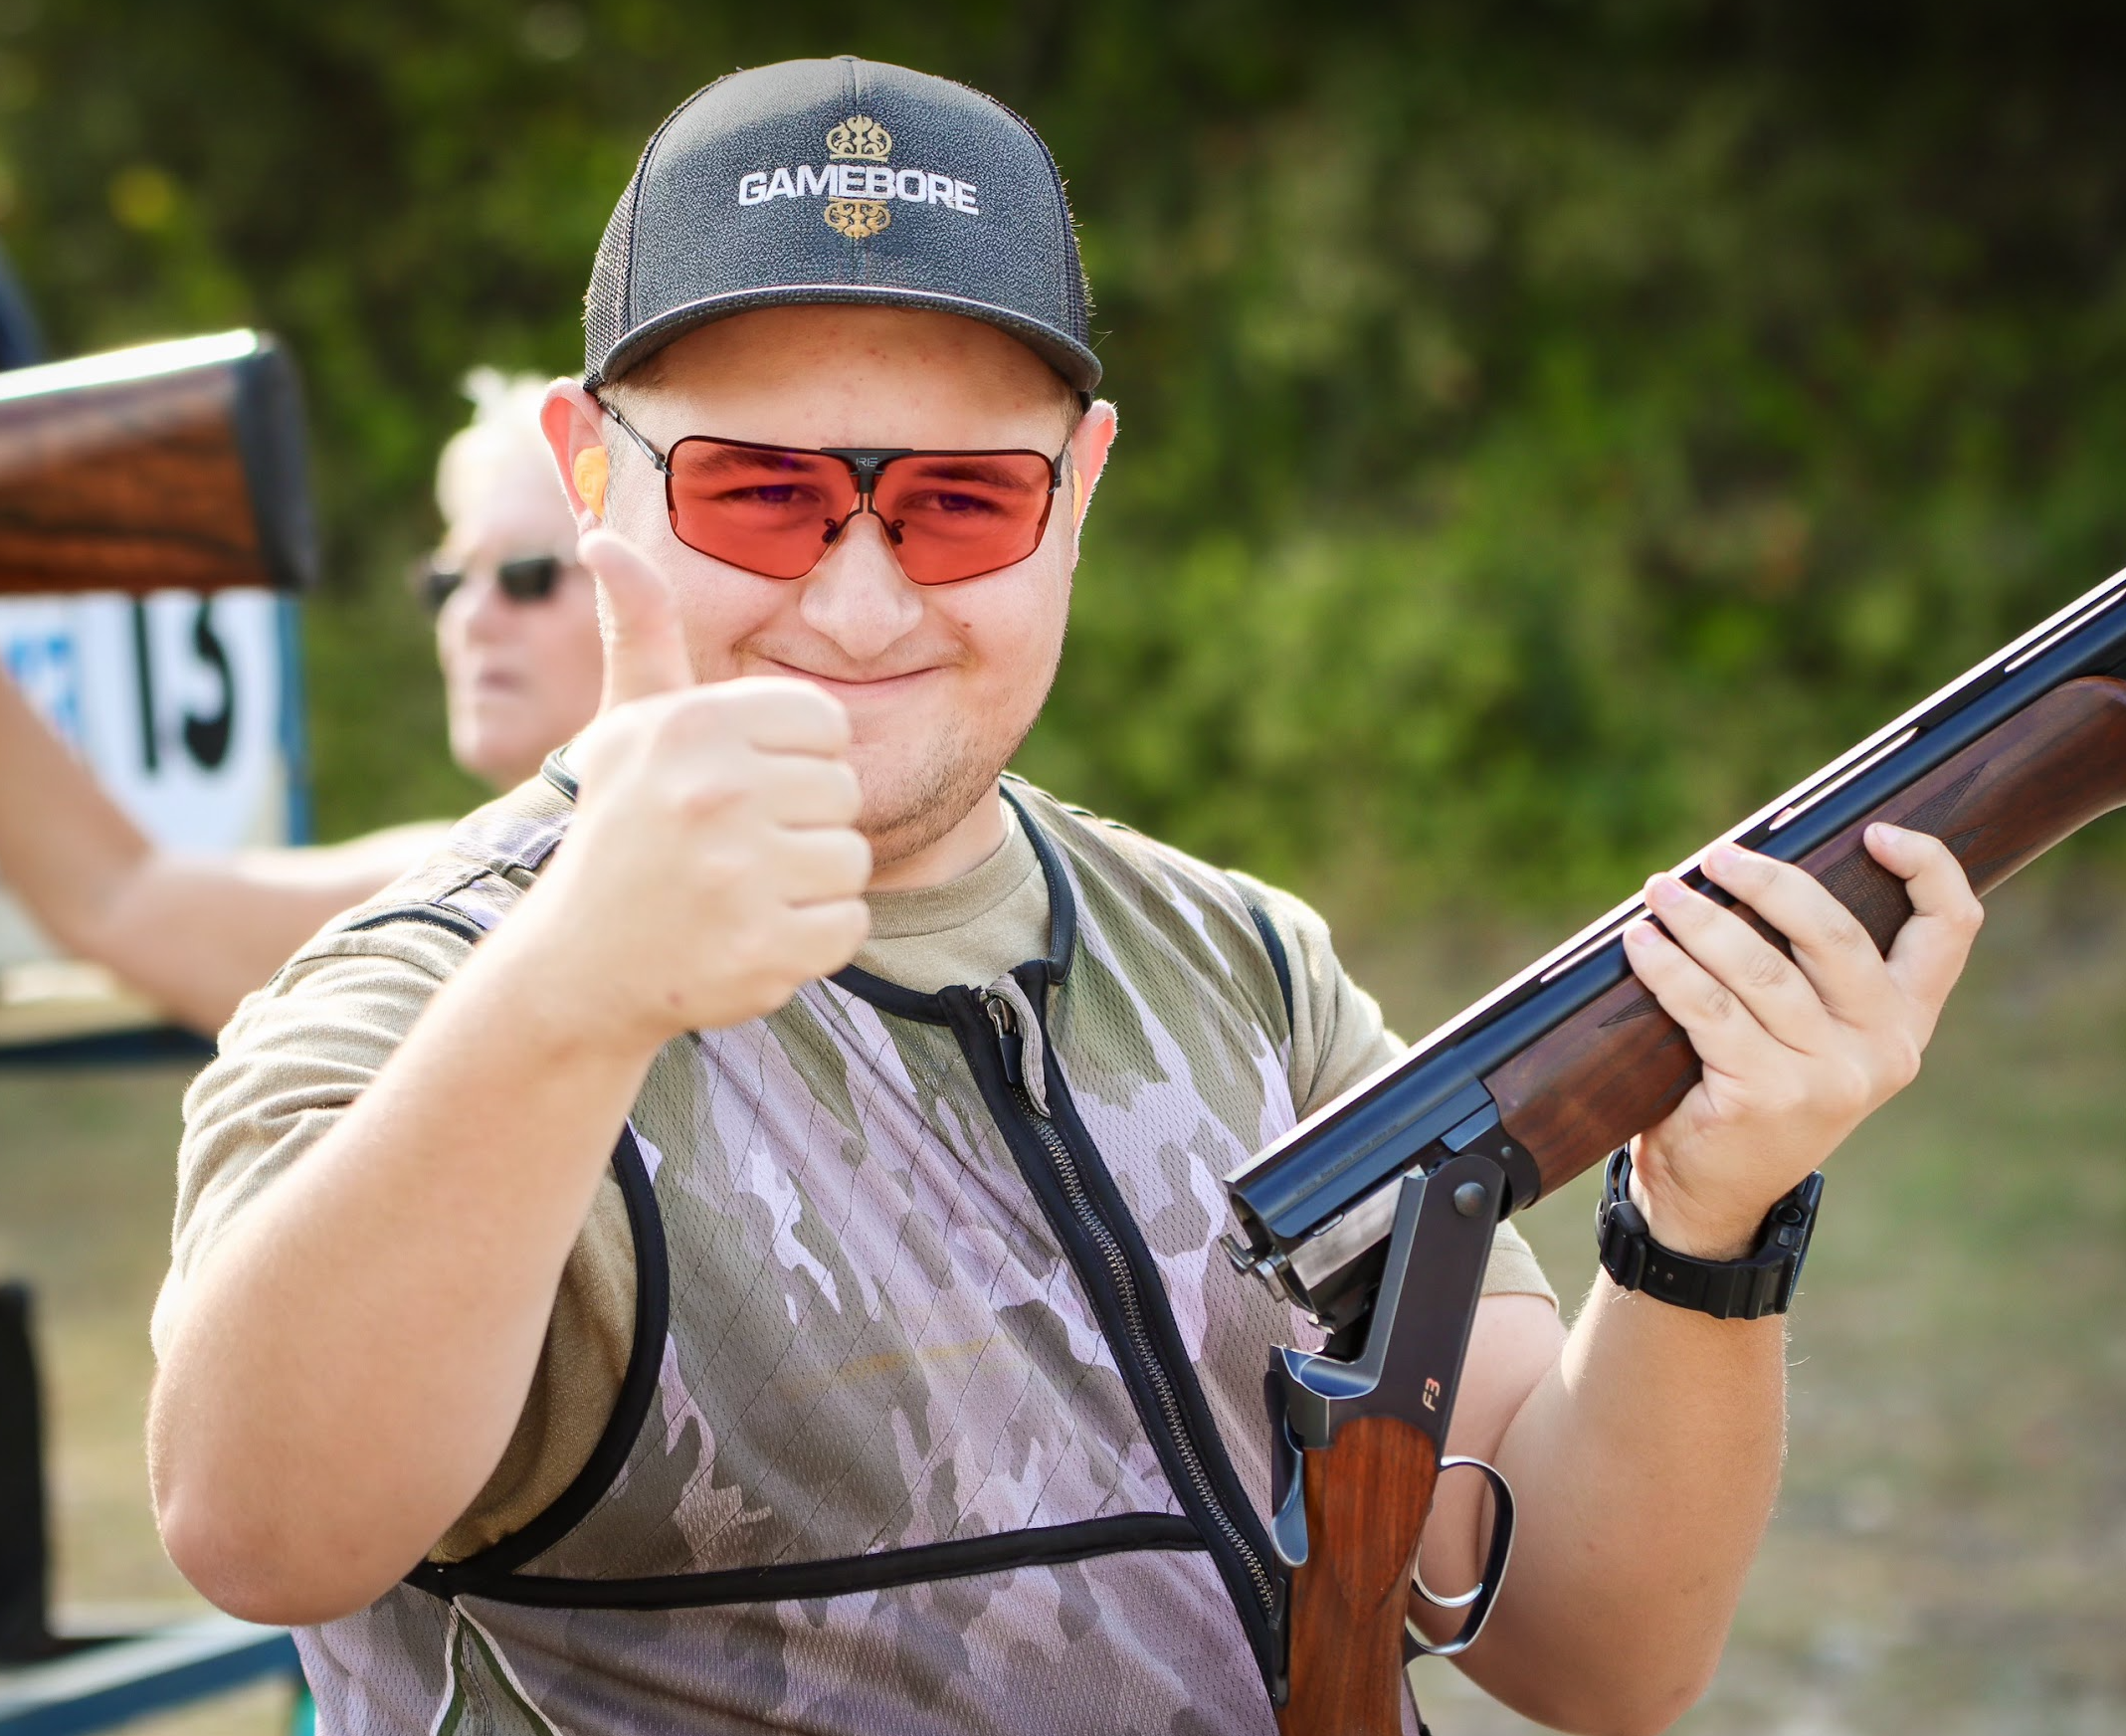 Shooter Spotlight: Will Anderson of North Carolina – His FITASC, Sporting Clays, and Hunting Rise